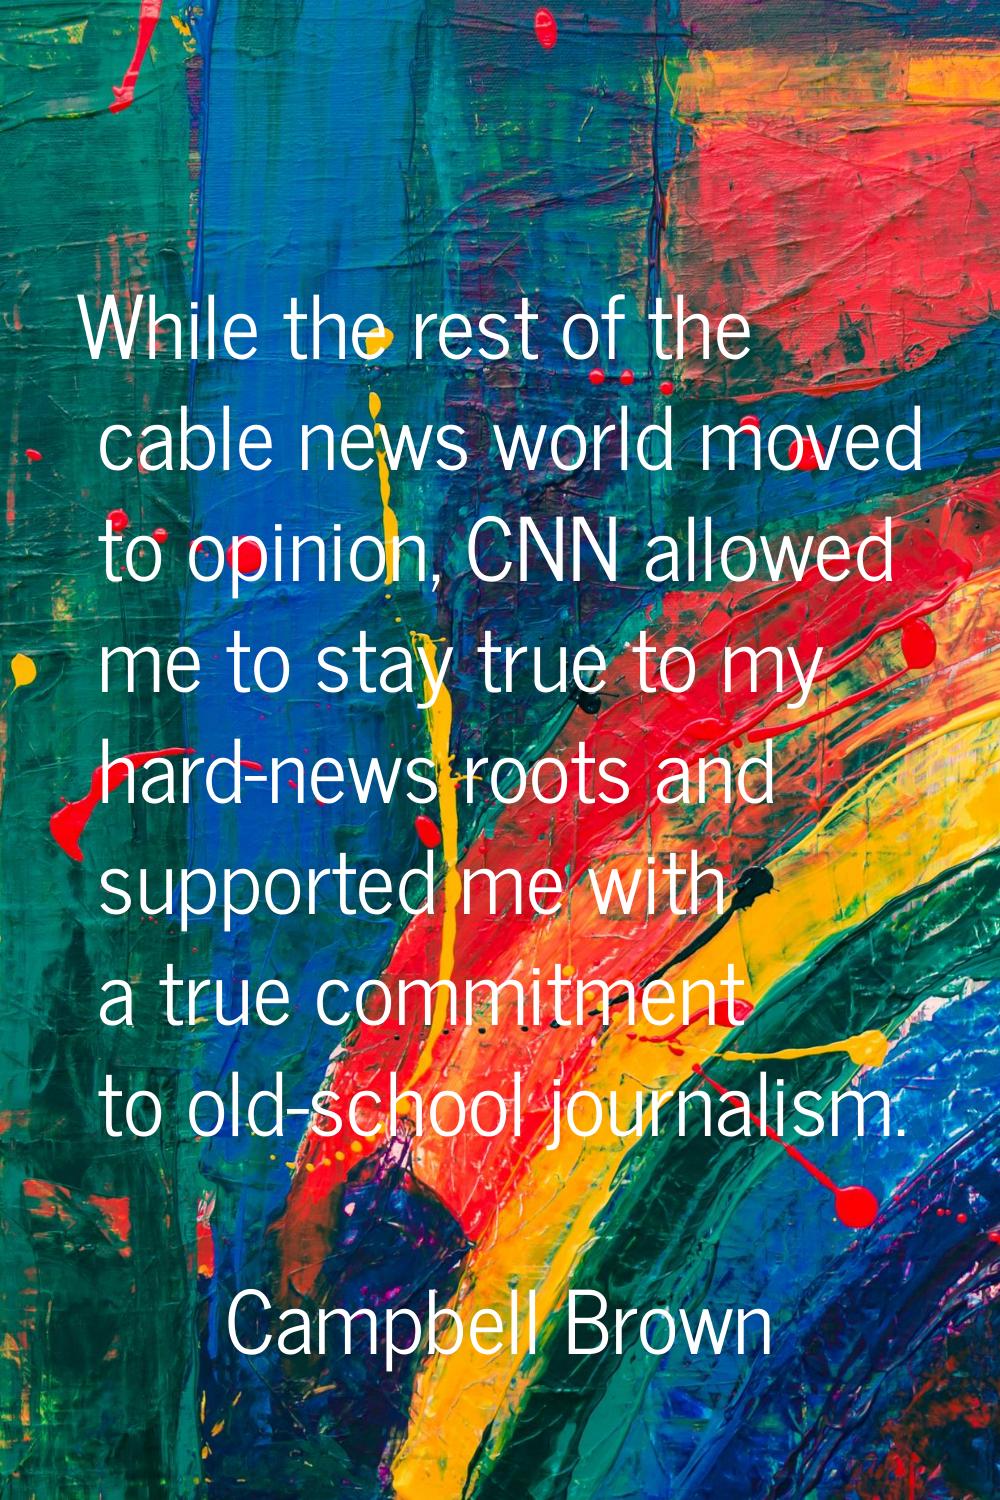 While the rest of the cable news world moved to opinion, CNN allowed me to stay true to my hard-new